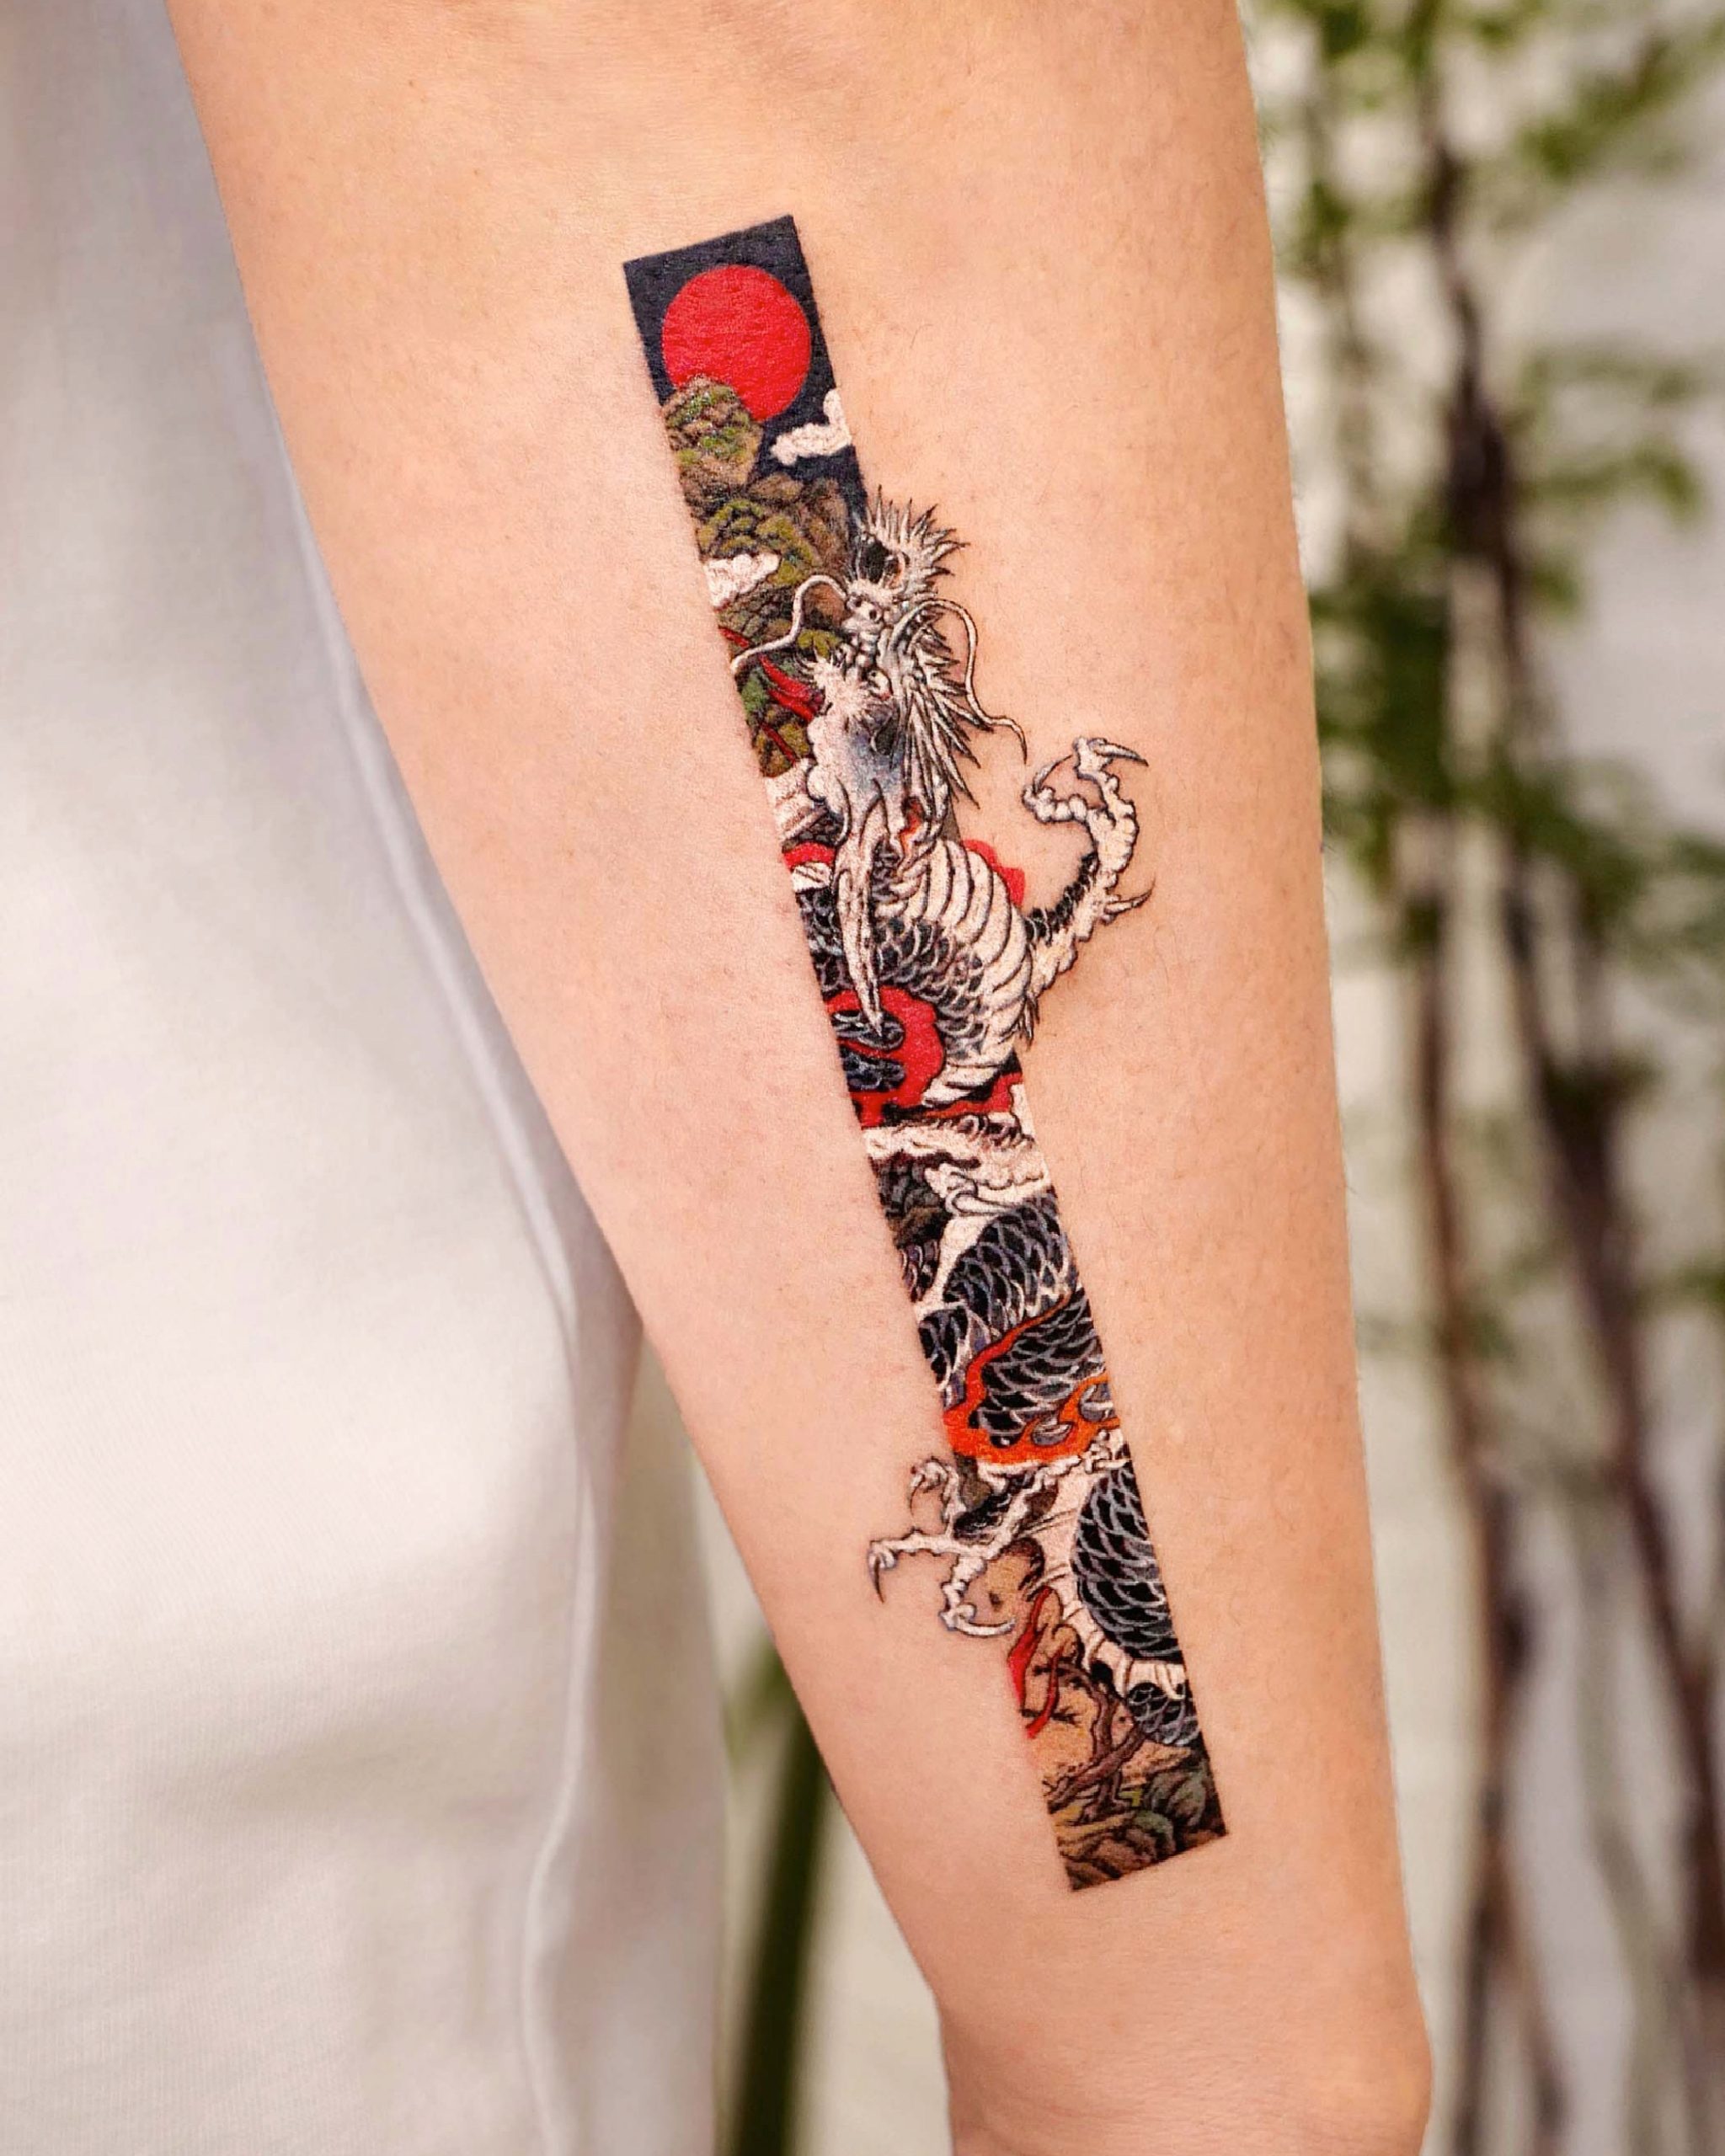 7 South Korean Tattoo Artists That You Should Follow On Instagram